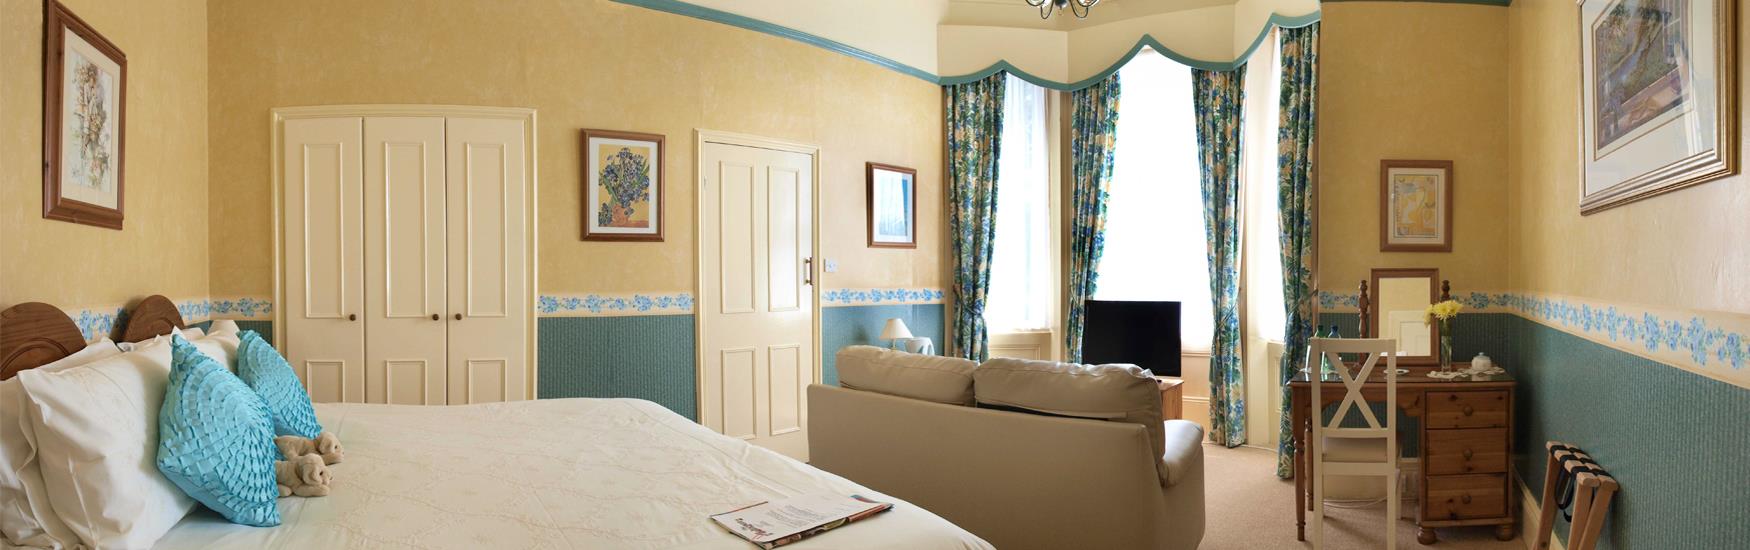 Beautiful B&B and Guest Accommodation in Bournemouth